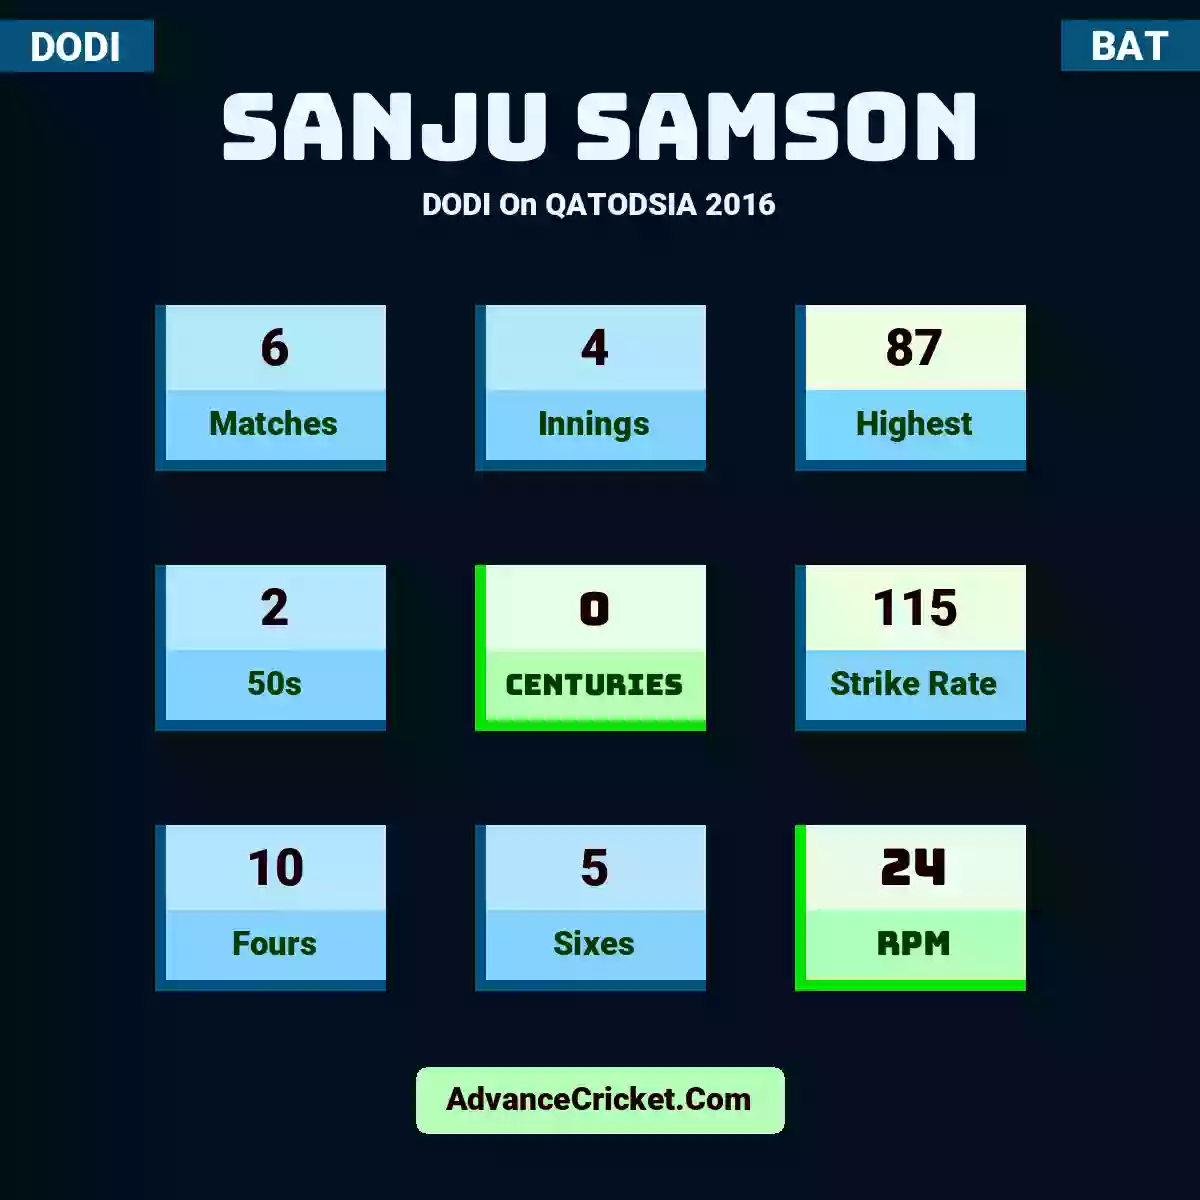 Sanju Samson DODI  On QATODSIA 2016, Sanju Samson played 6 matches, scored 87 runs as highest, 2 half-centuries, and 0 centuries, with a strike rate of 115. S.Samson hit 10 fours and 5 sixes, with an RPM of 24.